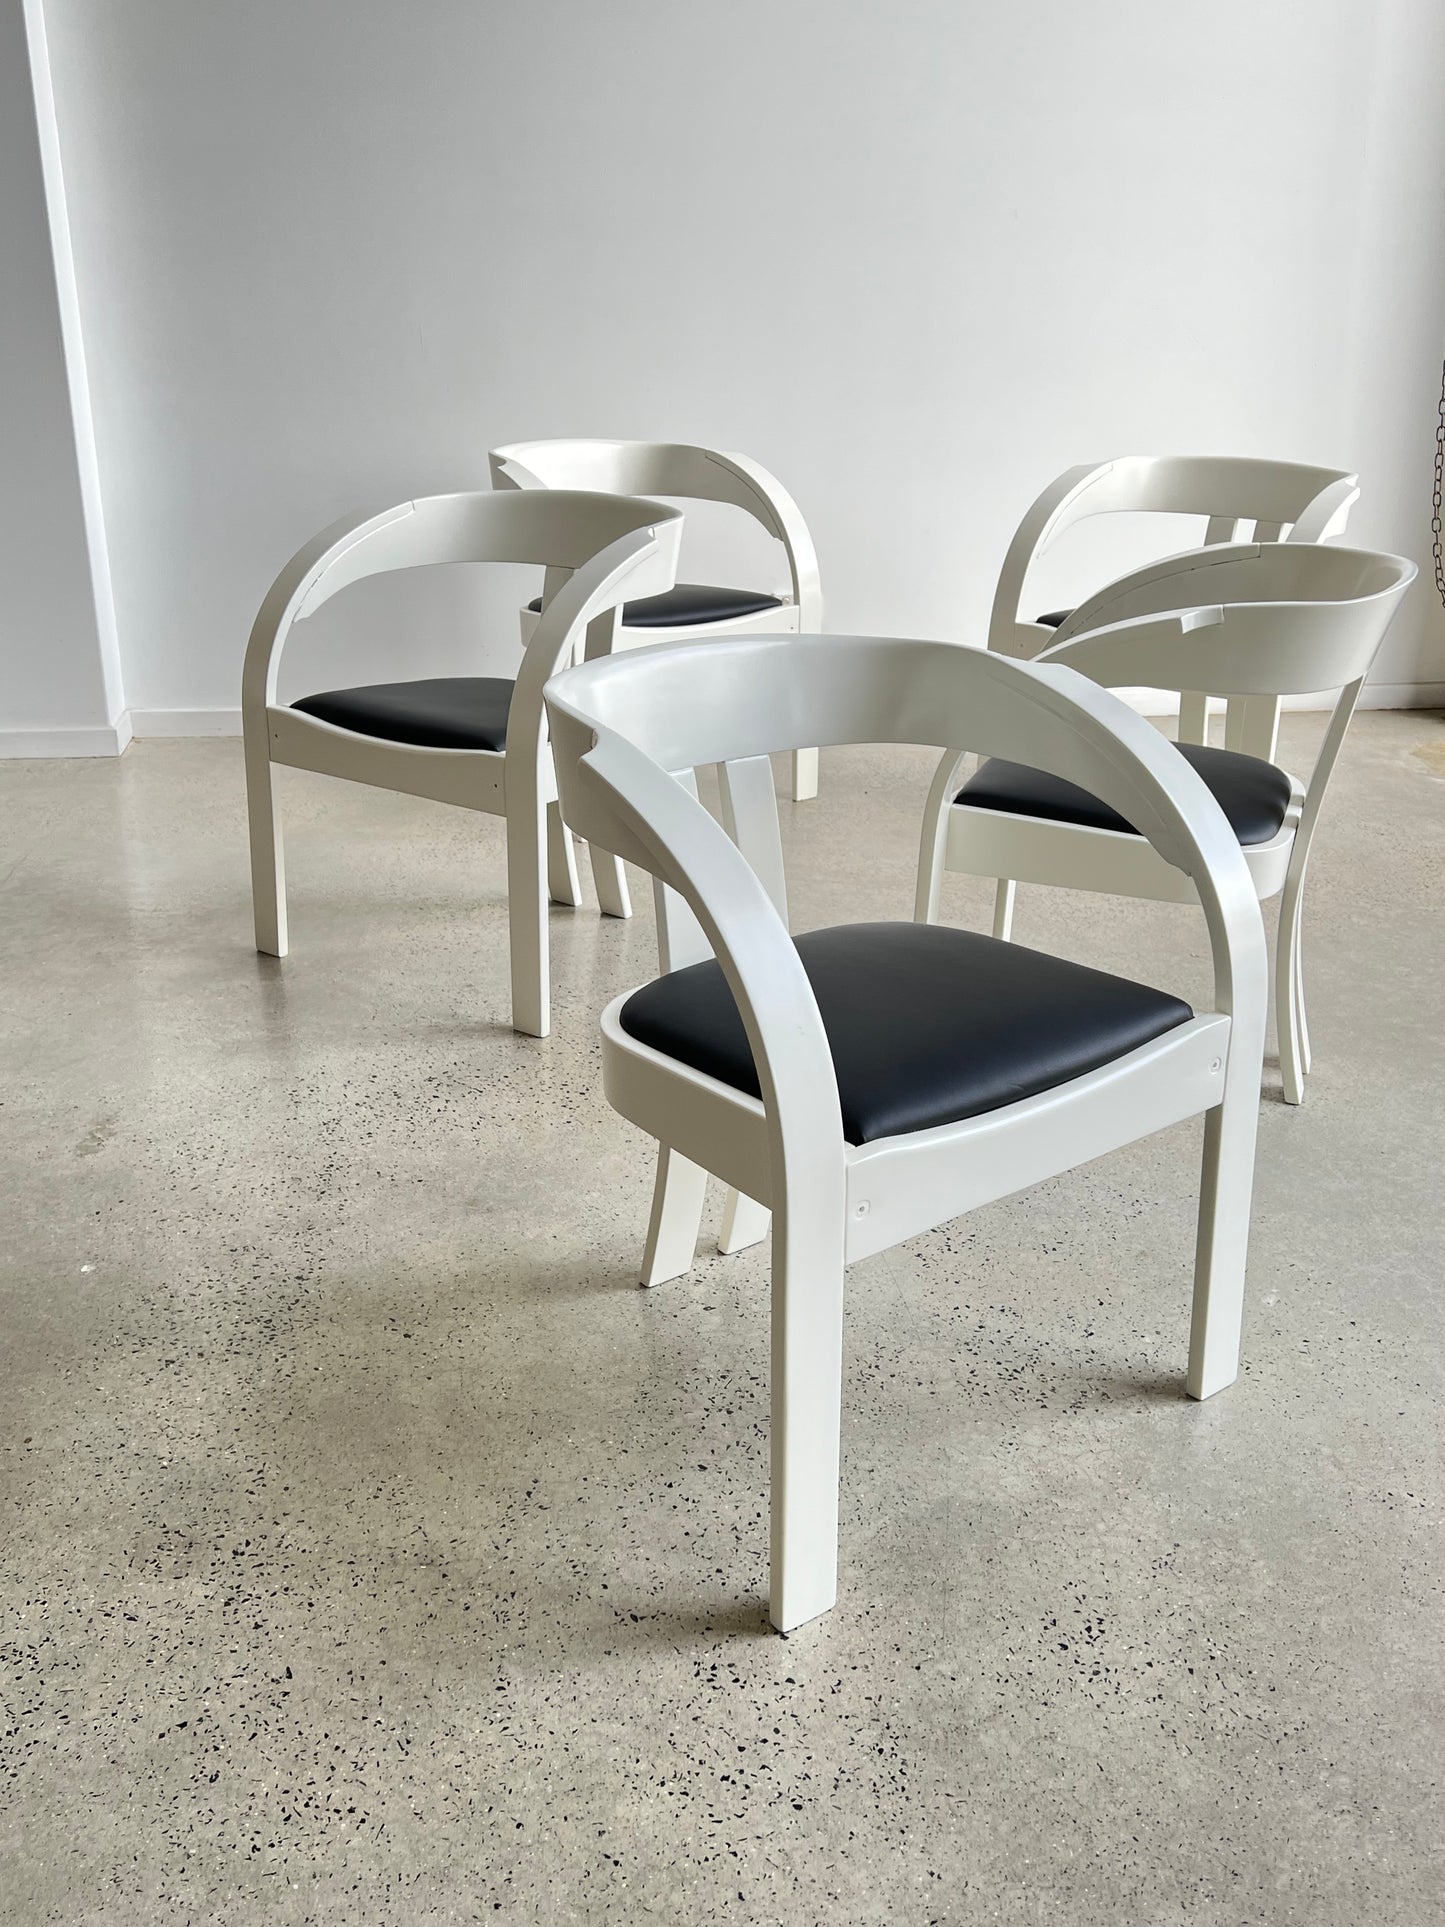 “Elisa” by Giovanni Battista Bassi for Poltronova, Black and White Dining Chairs, 1964